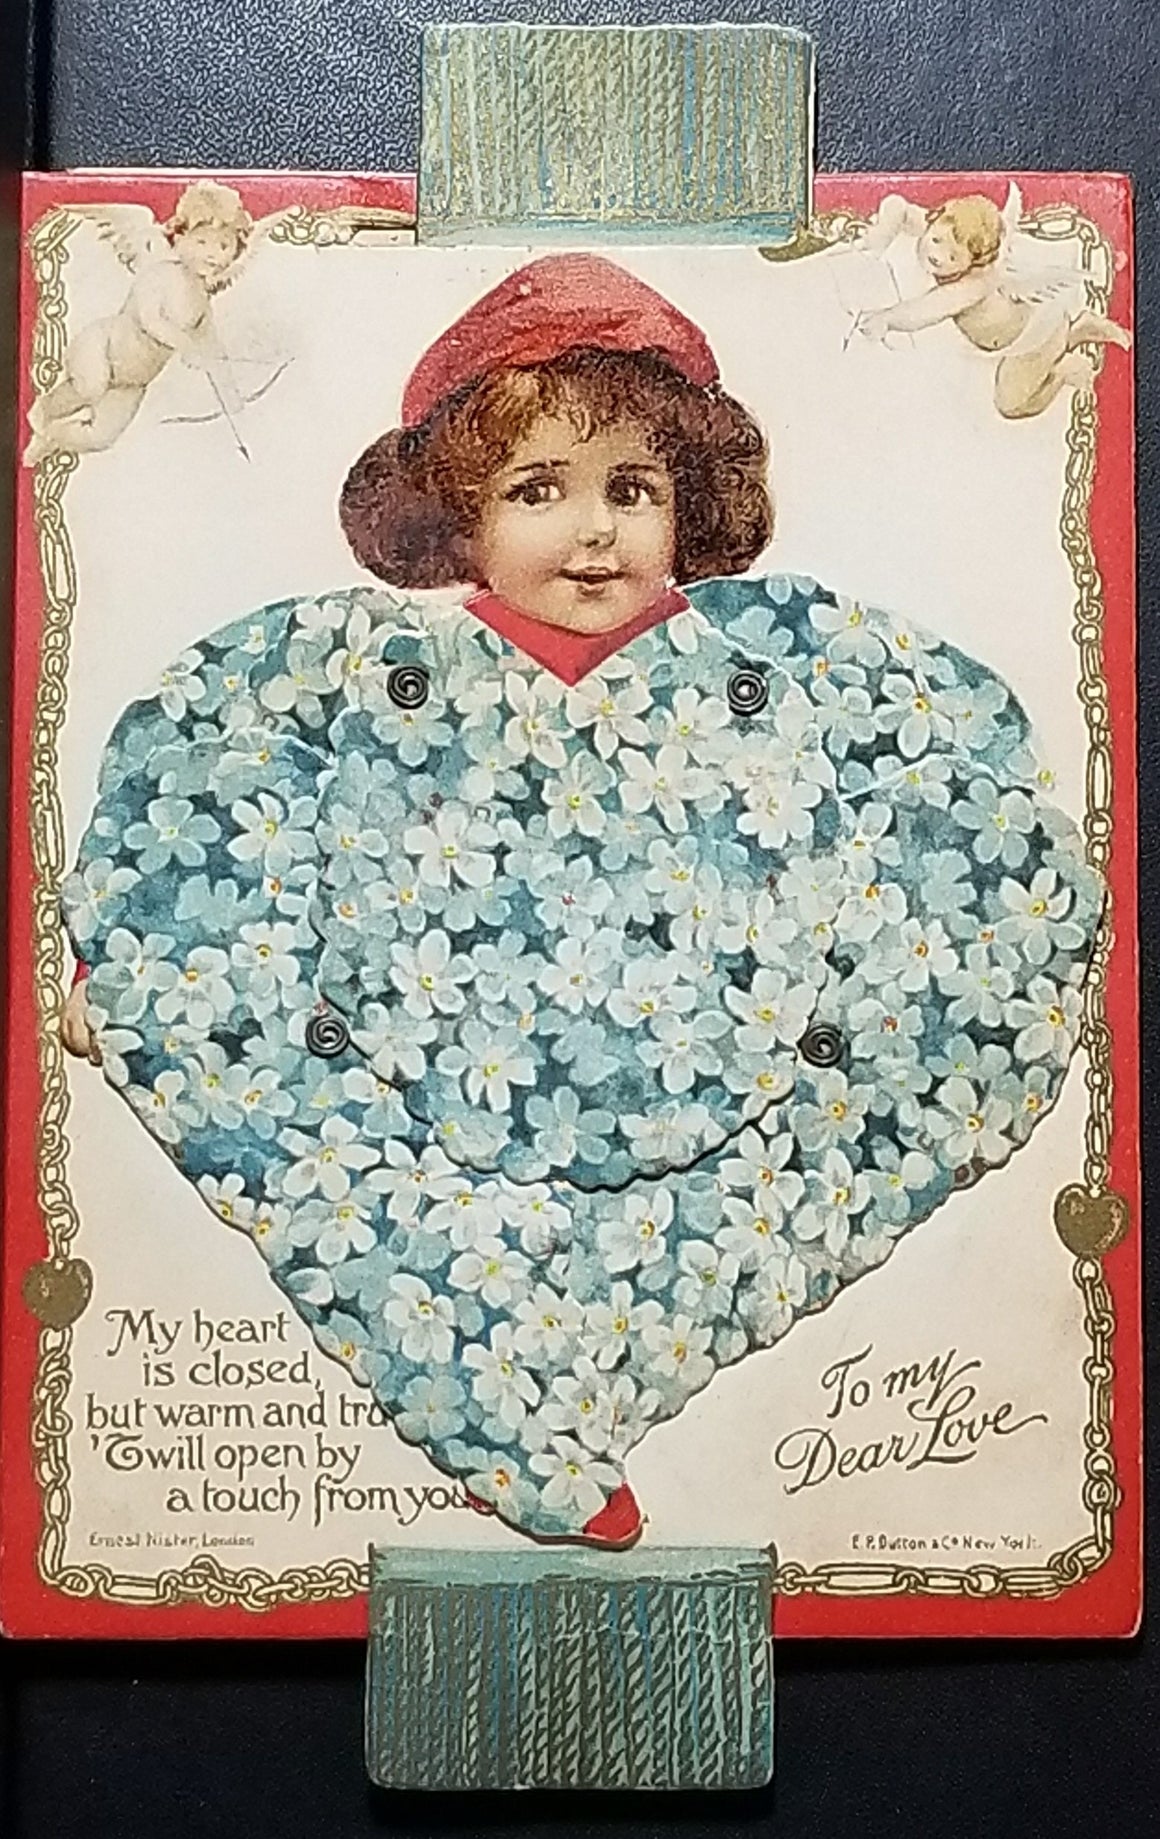 RARE Vintage Antique Mechanical Valentine Card Pull Tab Young Child in Flower Heart Arms Legs Emerge Ernest Nister Publishing No 887